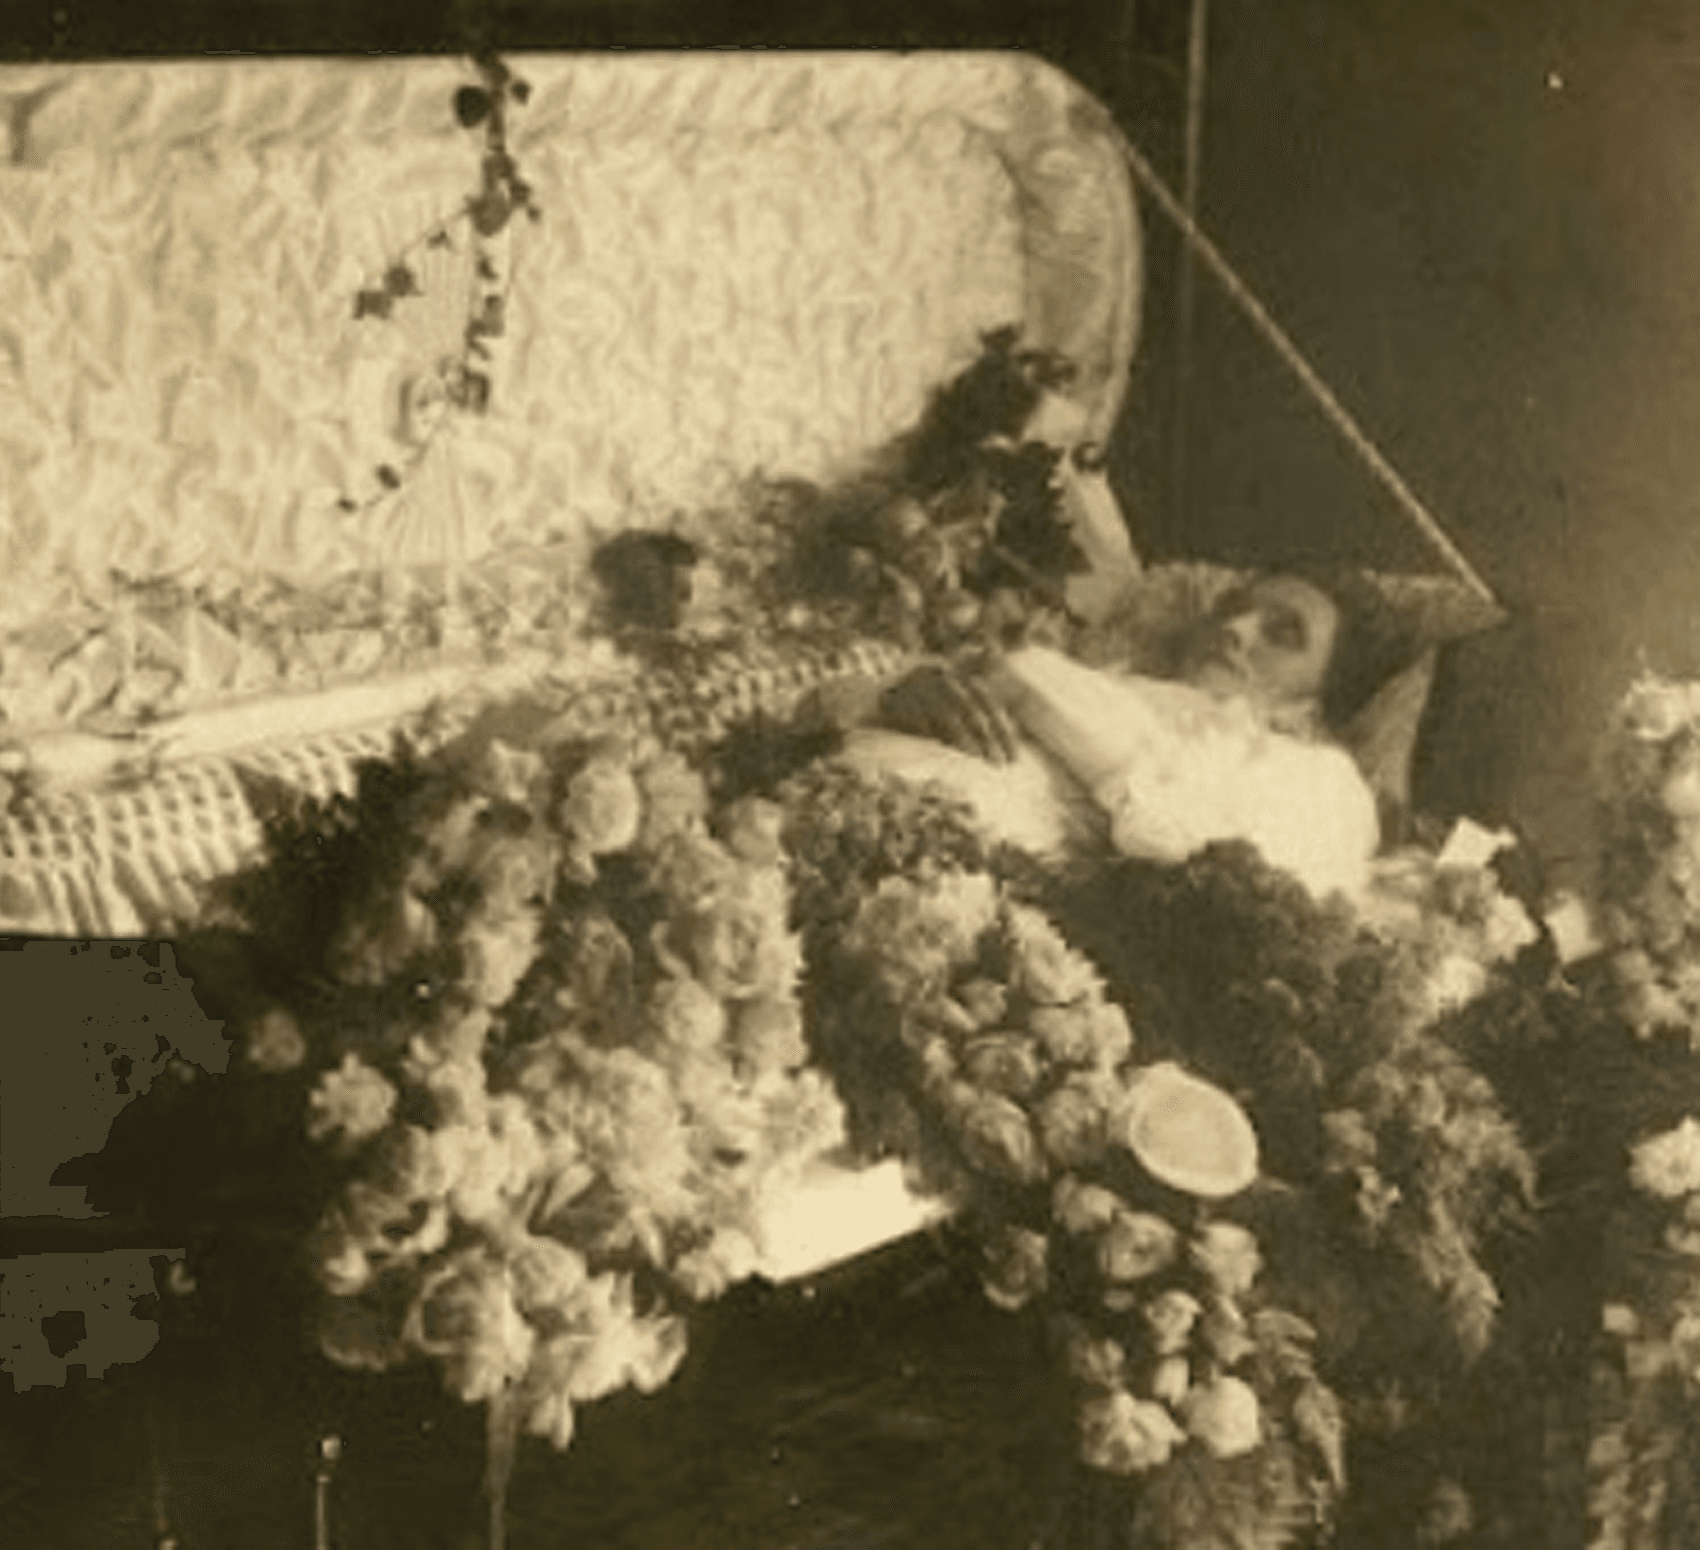 Antique photo of woman lying in casket with elaborate flowers inside and below the casket